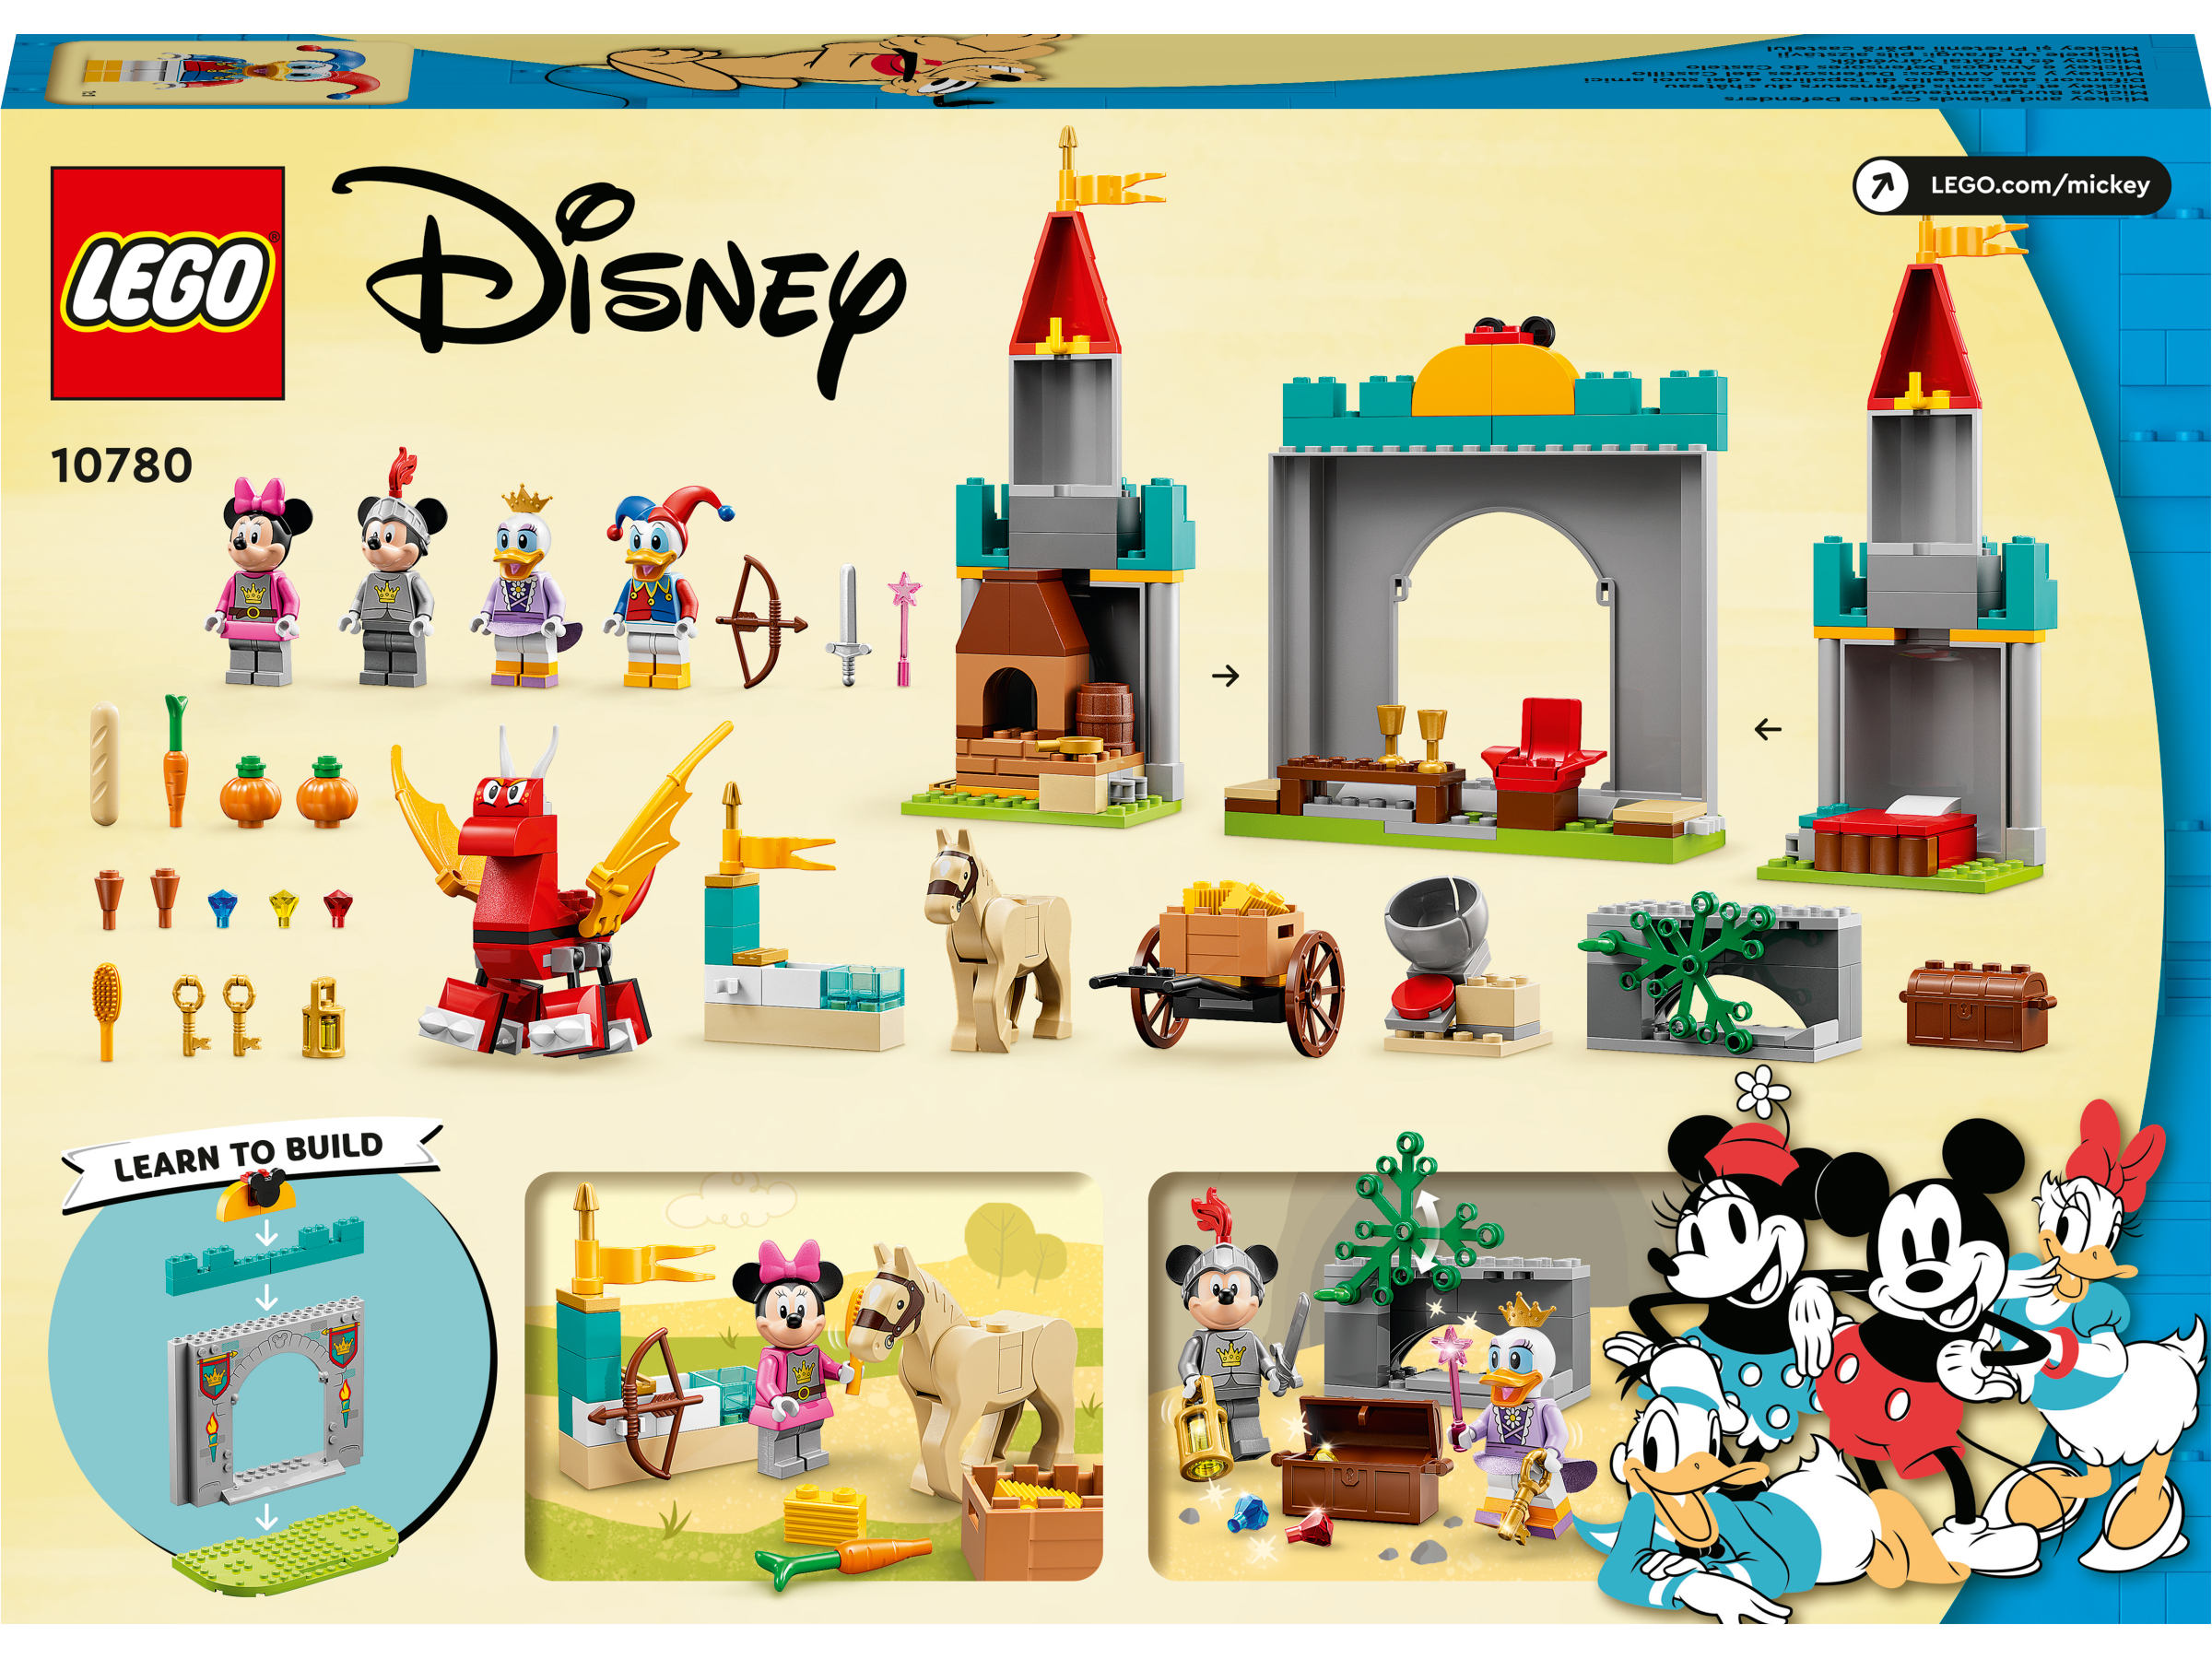 Lego 10780 Mickey and Friends Castle Defenders